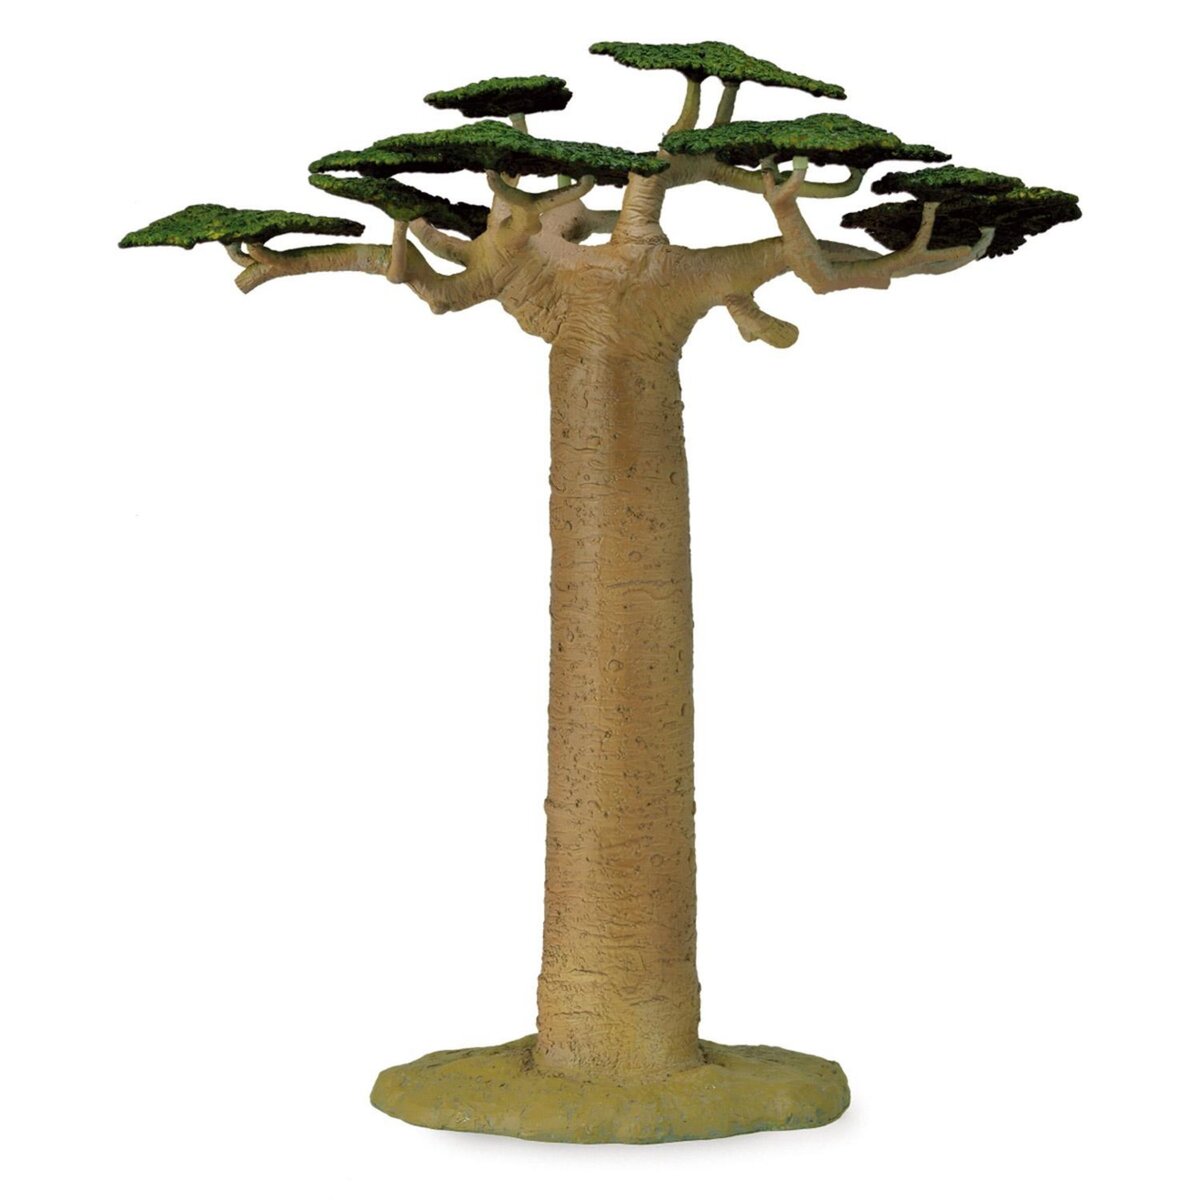 Figurines Collecta Décor animaux sauvages : Arbre Baobab